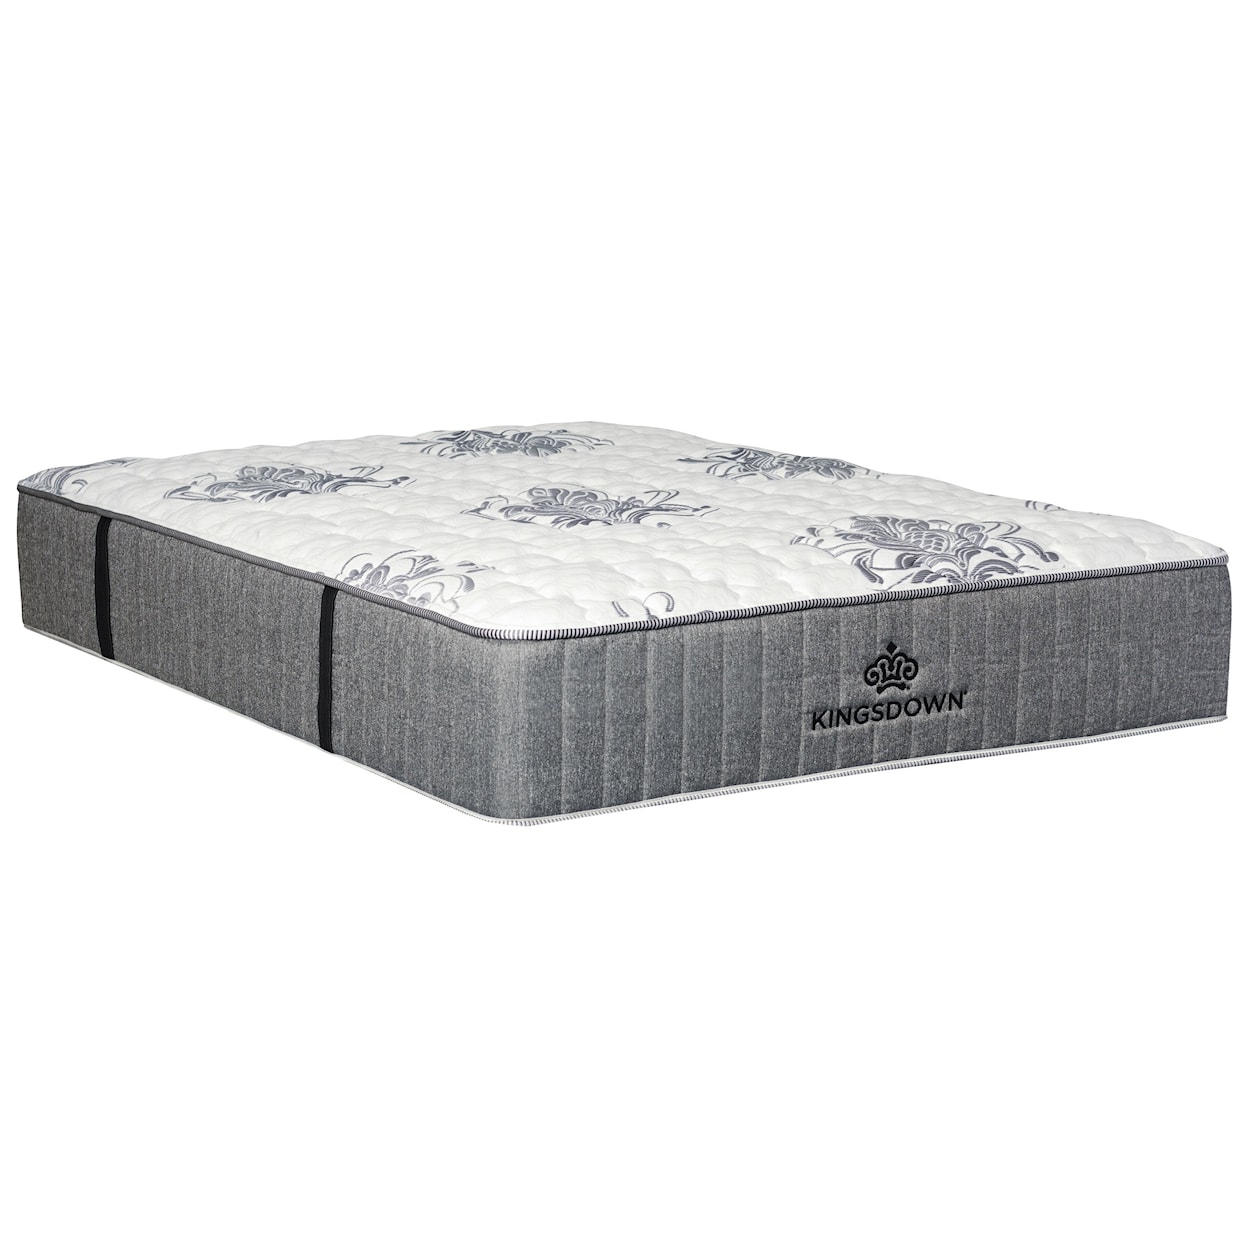 Kingsdown Passions Zest Extra Firm Twin 14" Extra Firm Mattress